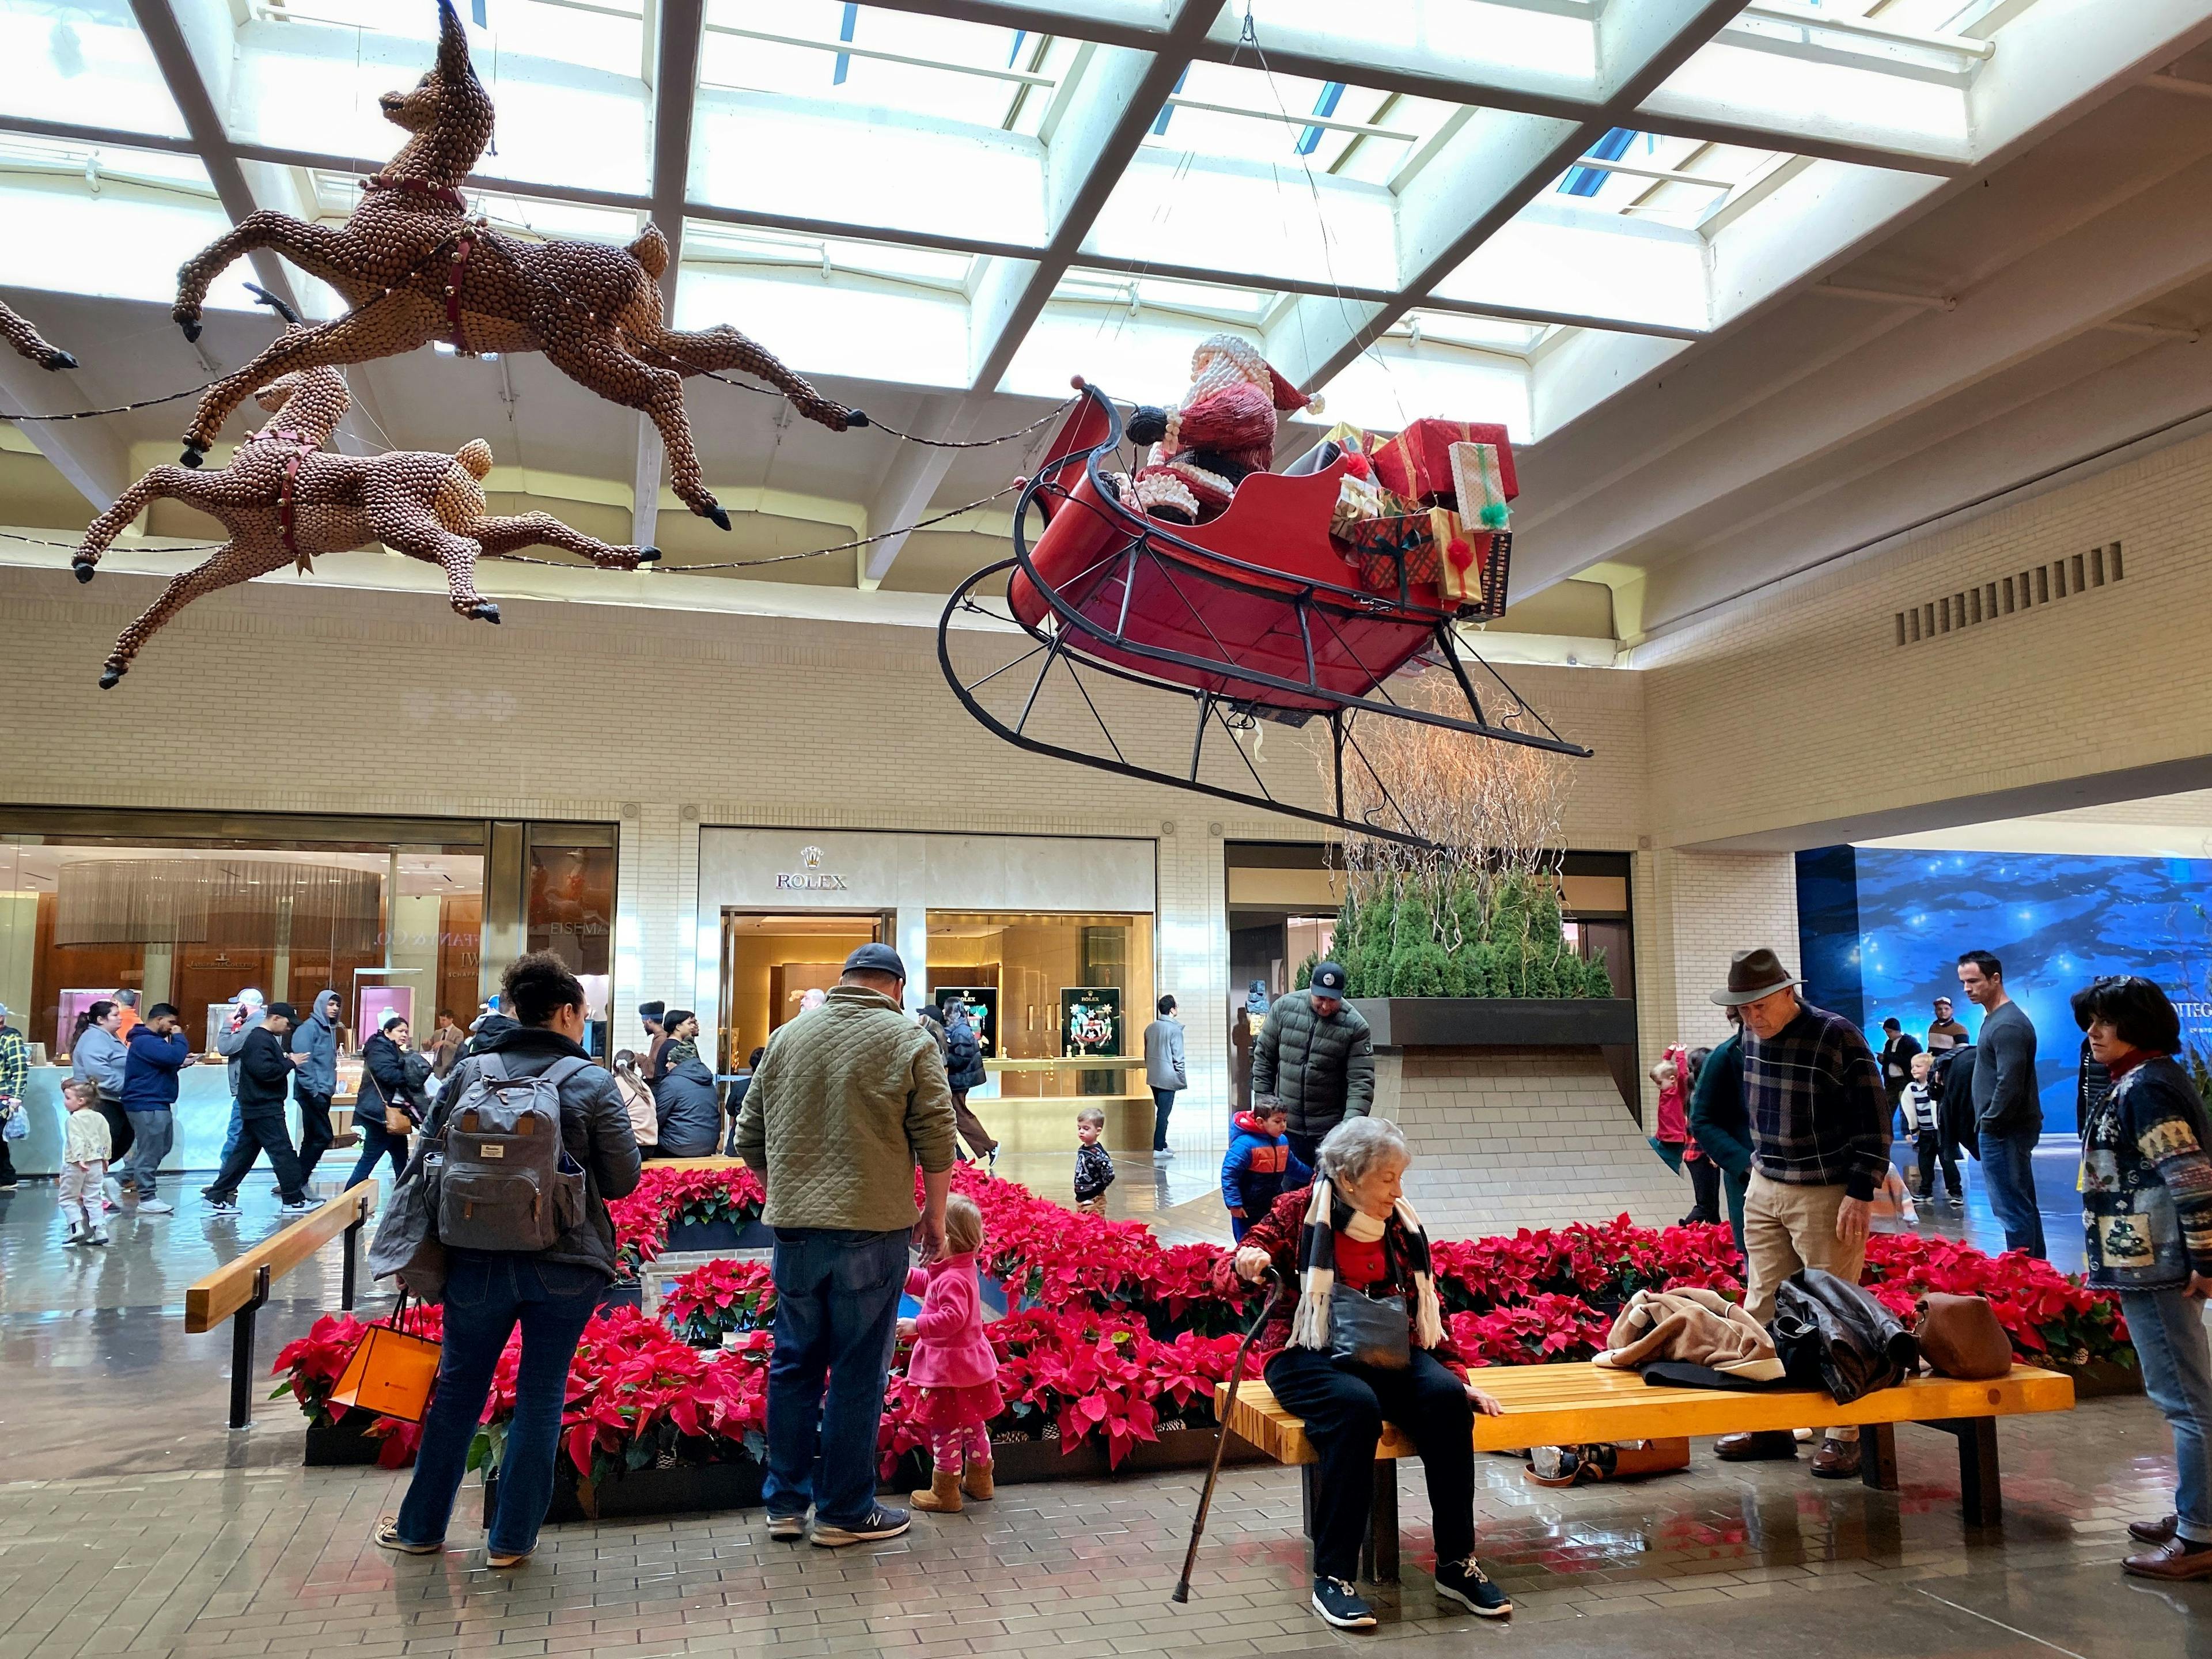 Santa's sleight hung from the ceiling in a mall in Dallas